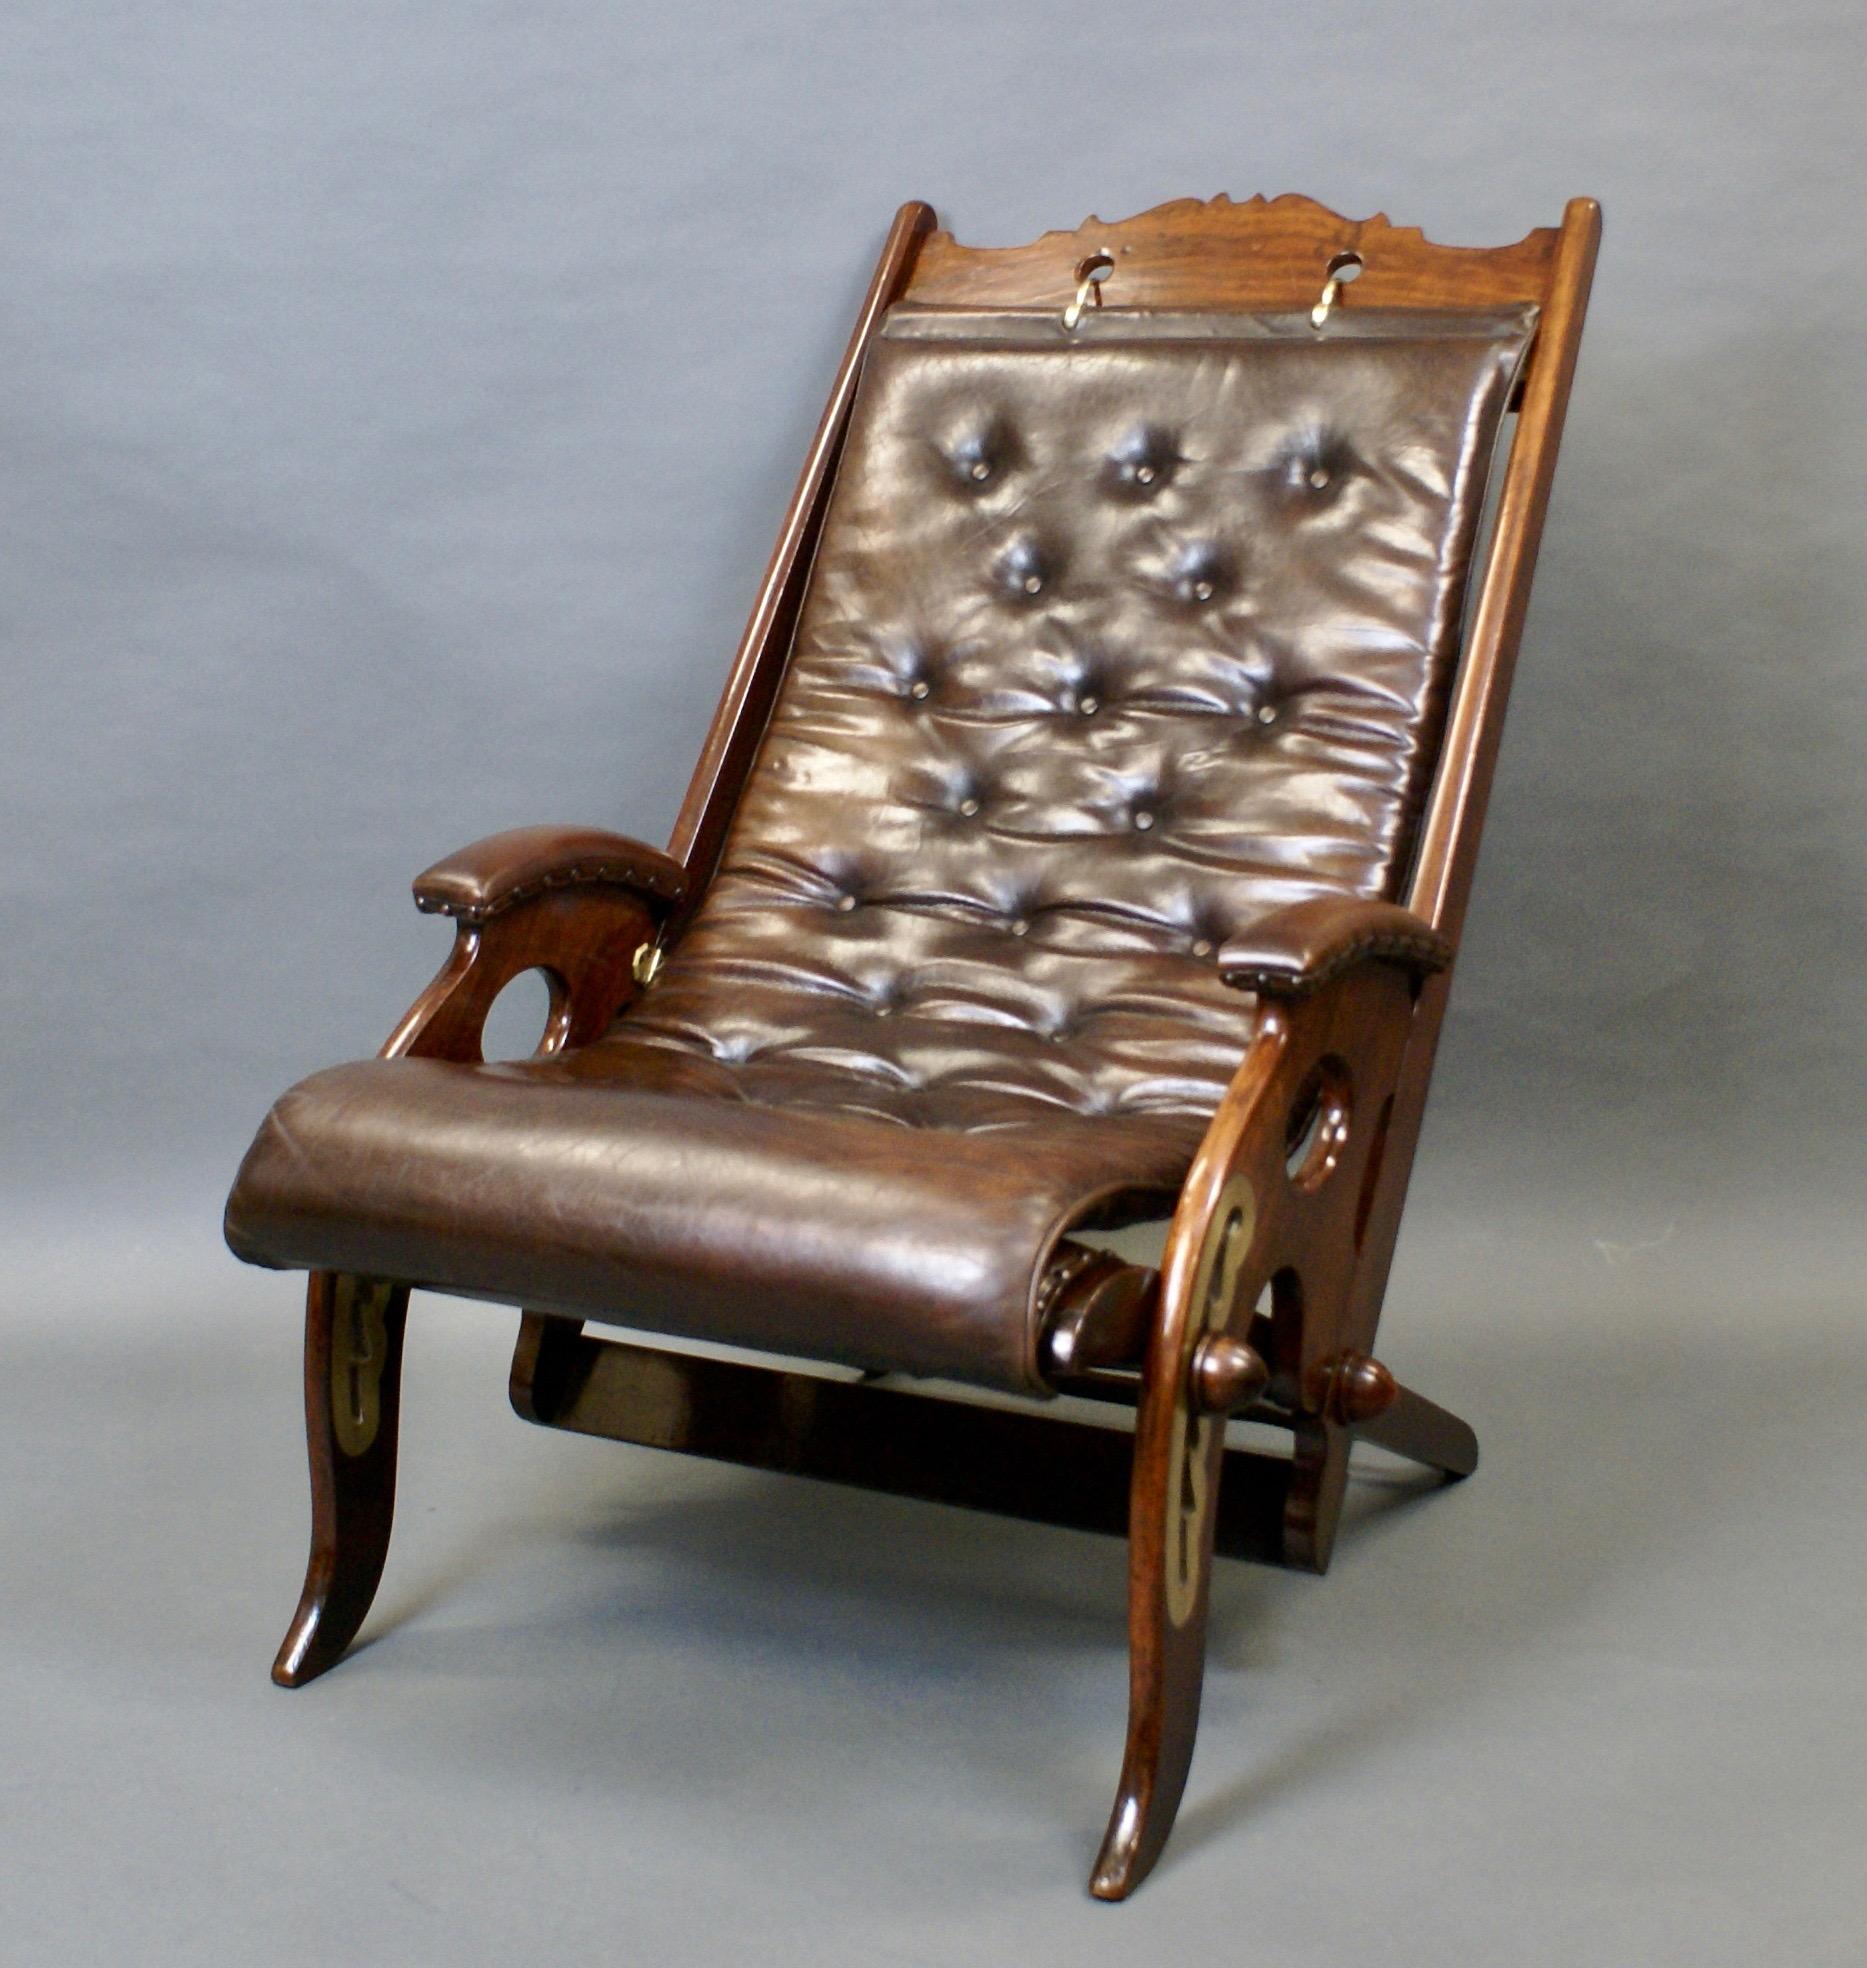 A mid 19th century adjustable deck chair. In mahogany with brass mounted ratchets to alter the height and angle of the chair and with buttoned leather upholstered seat and arm pads. In very good fully working order and condition. A great example of